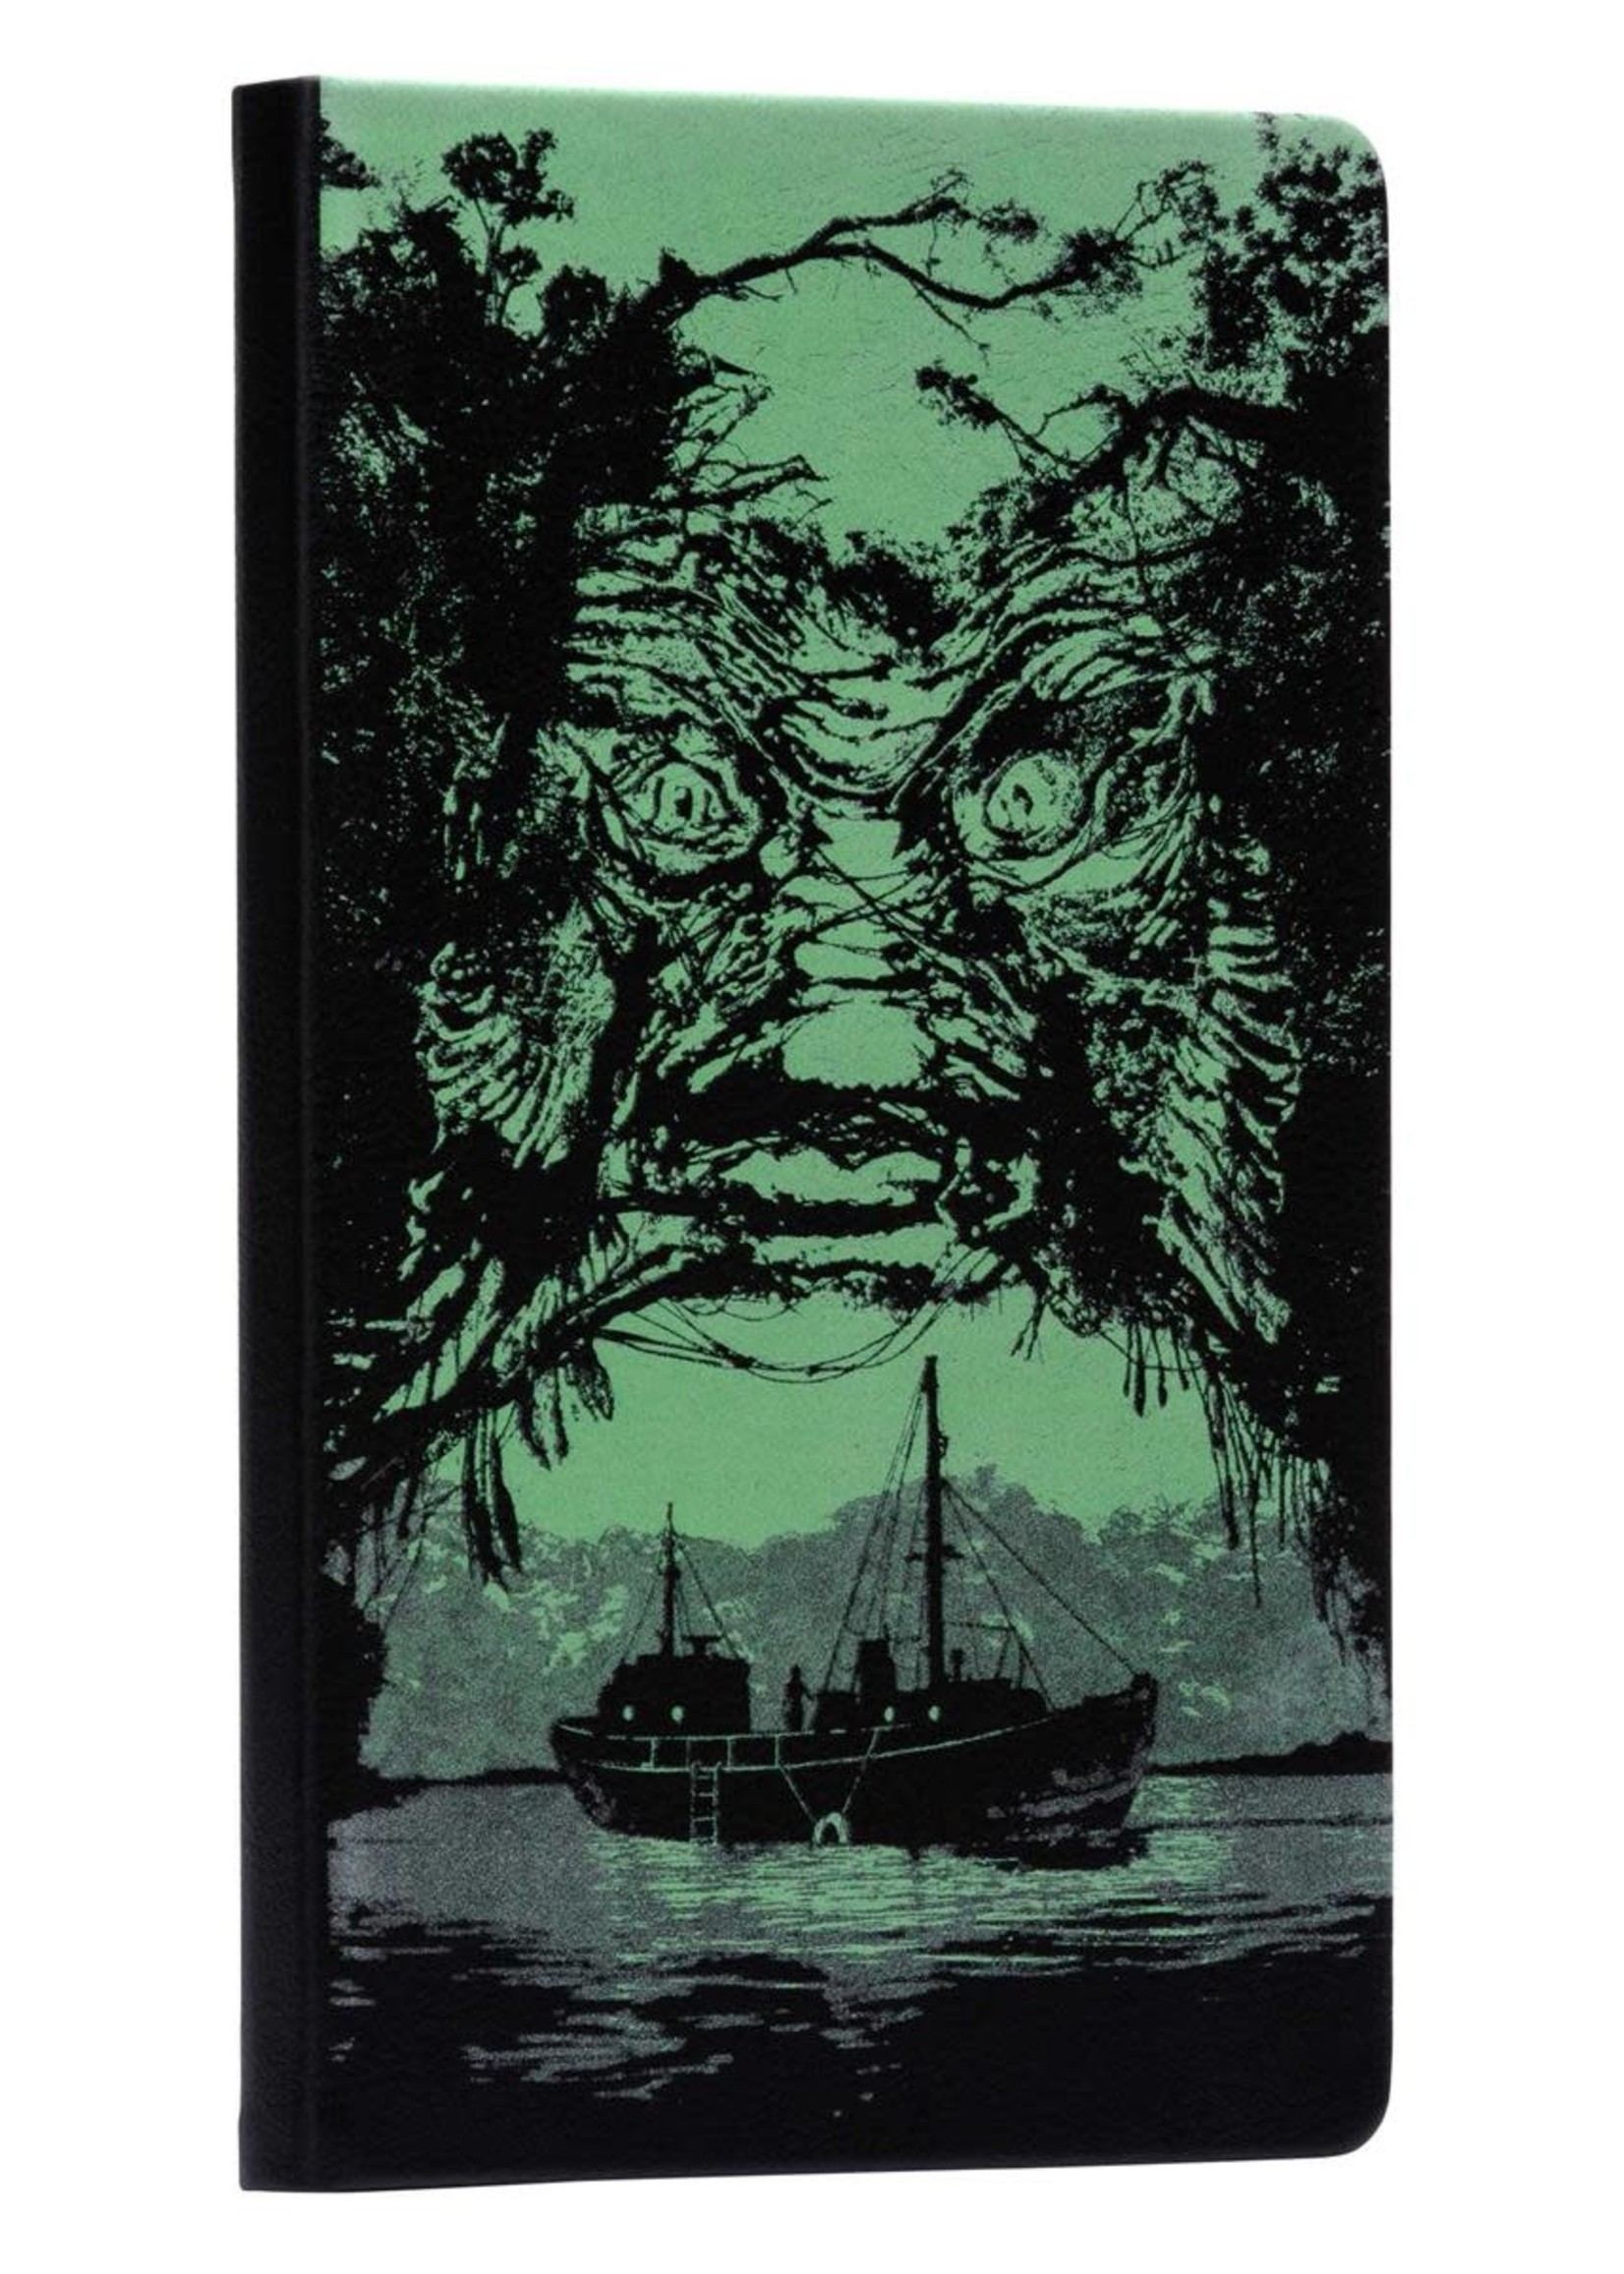 Universal Monsters: Creature from the Black Lagoon Glow in the Dark Journal by Insight Editions